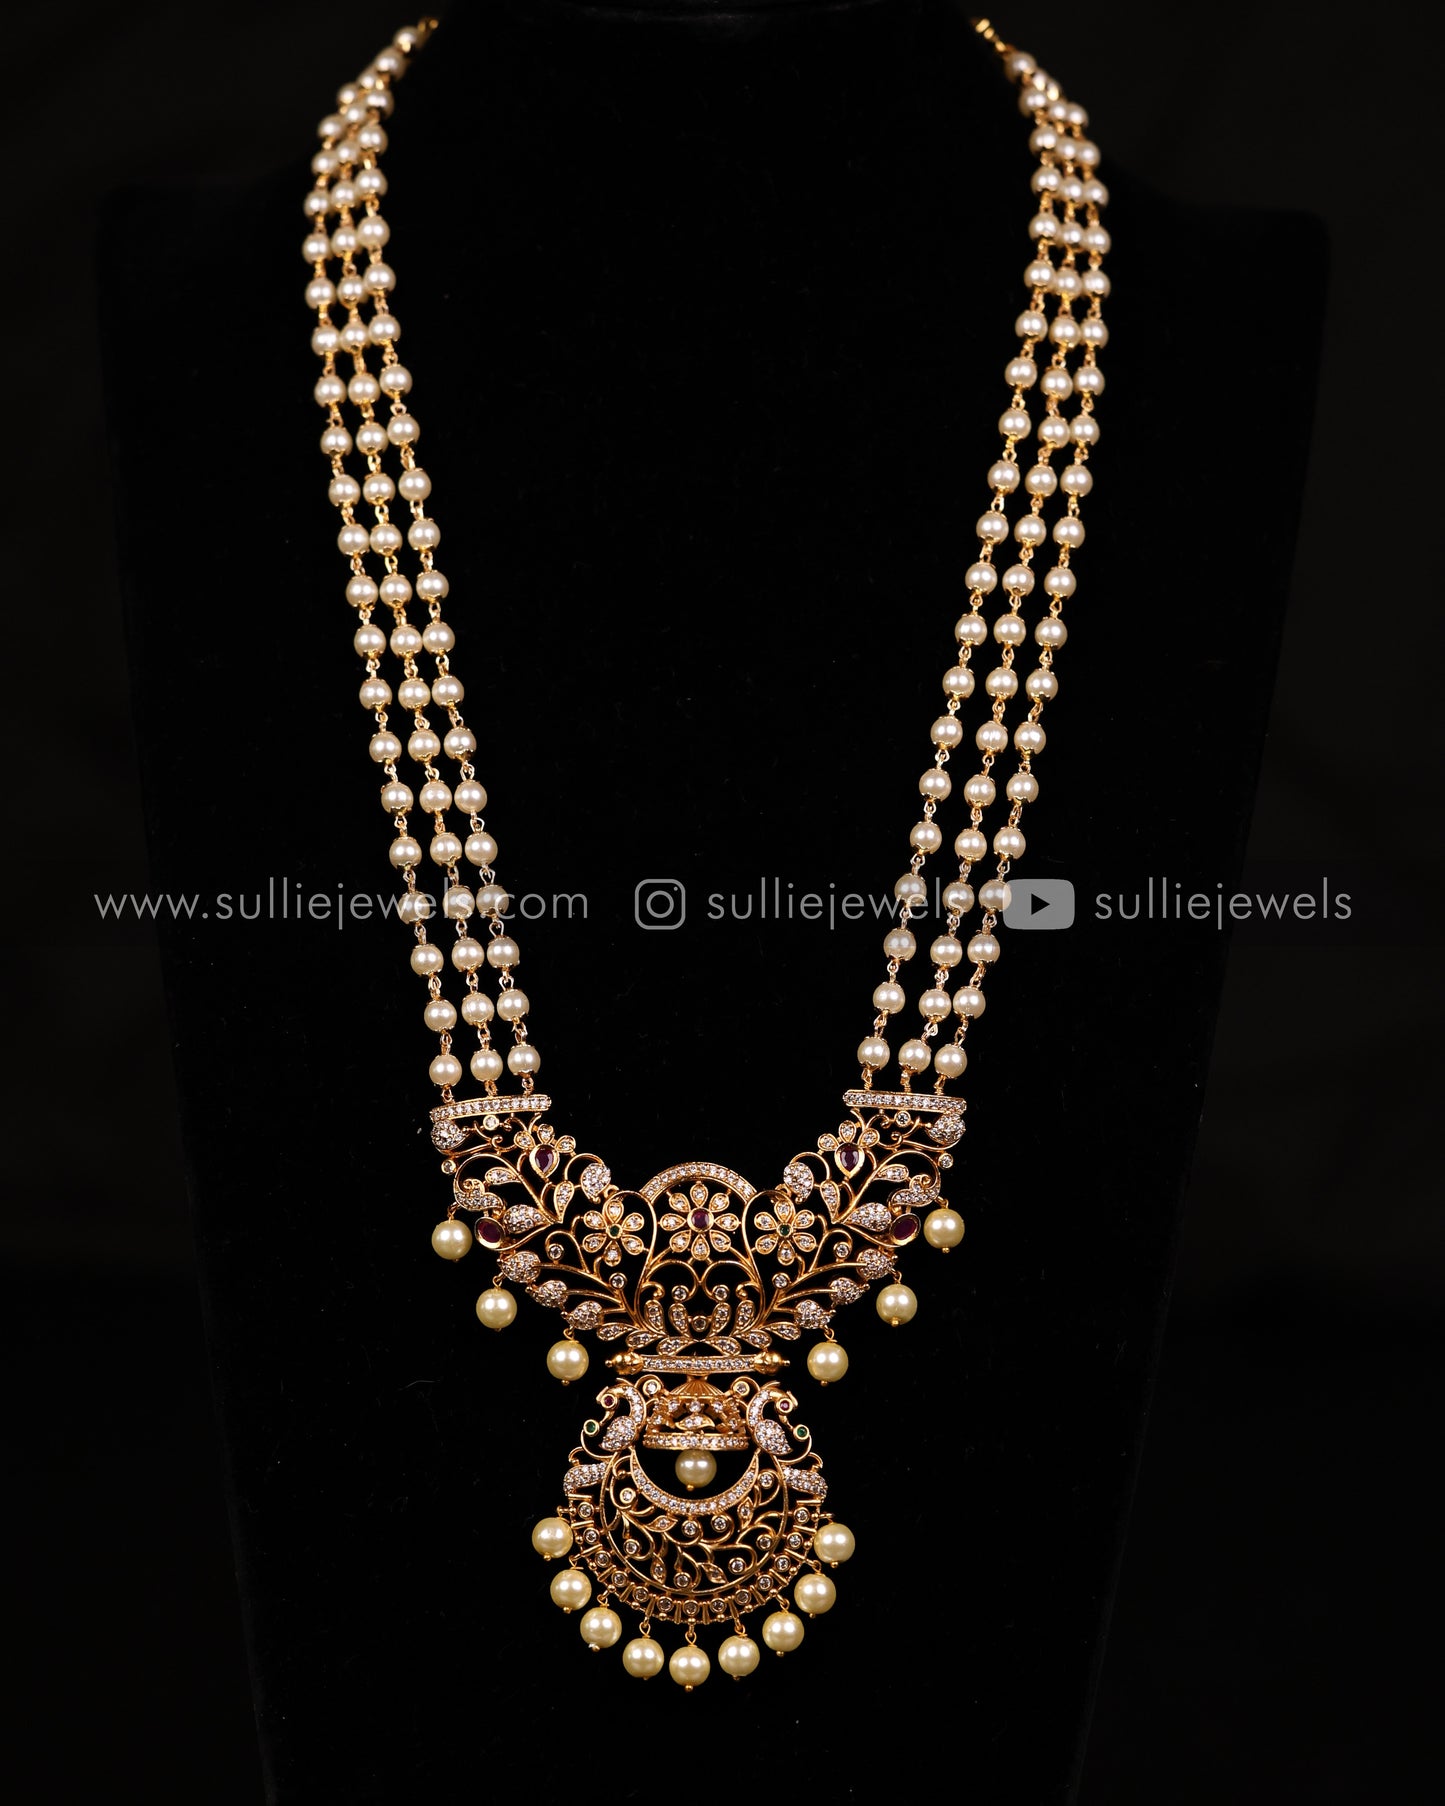 Combo Offer - Necklace, Long Necklace, Pearl Haram & 3 set of earrings